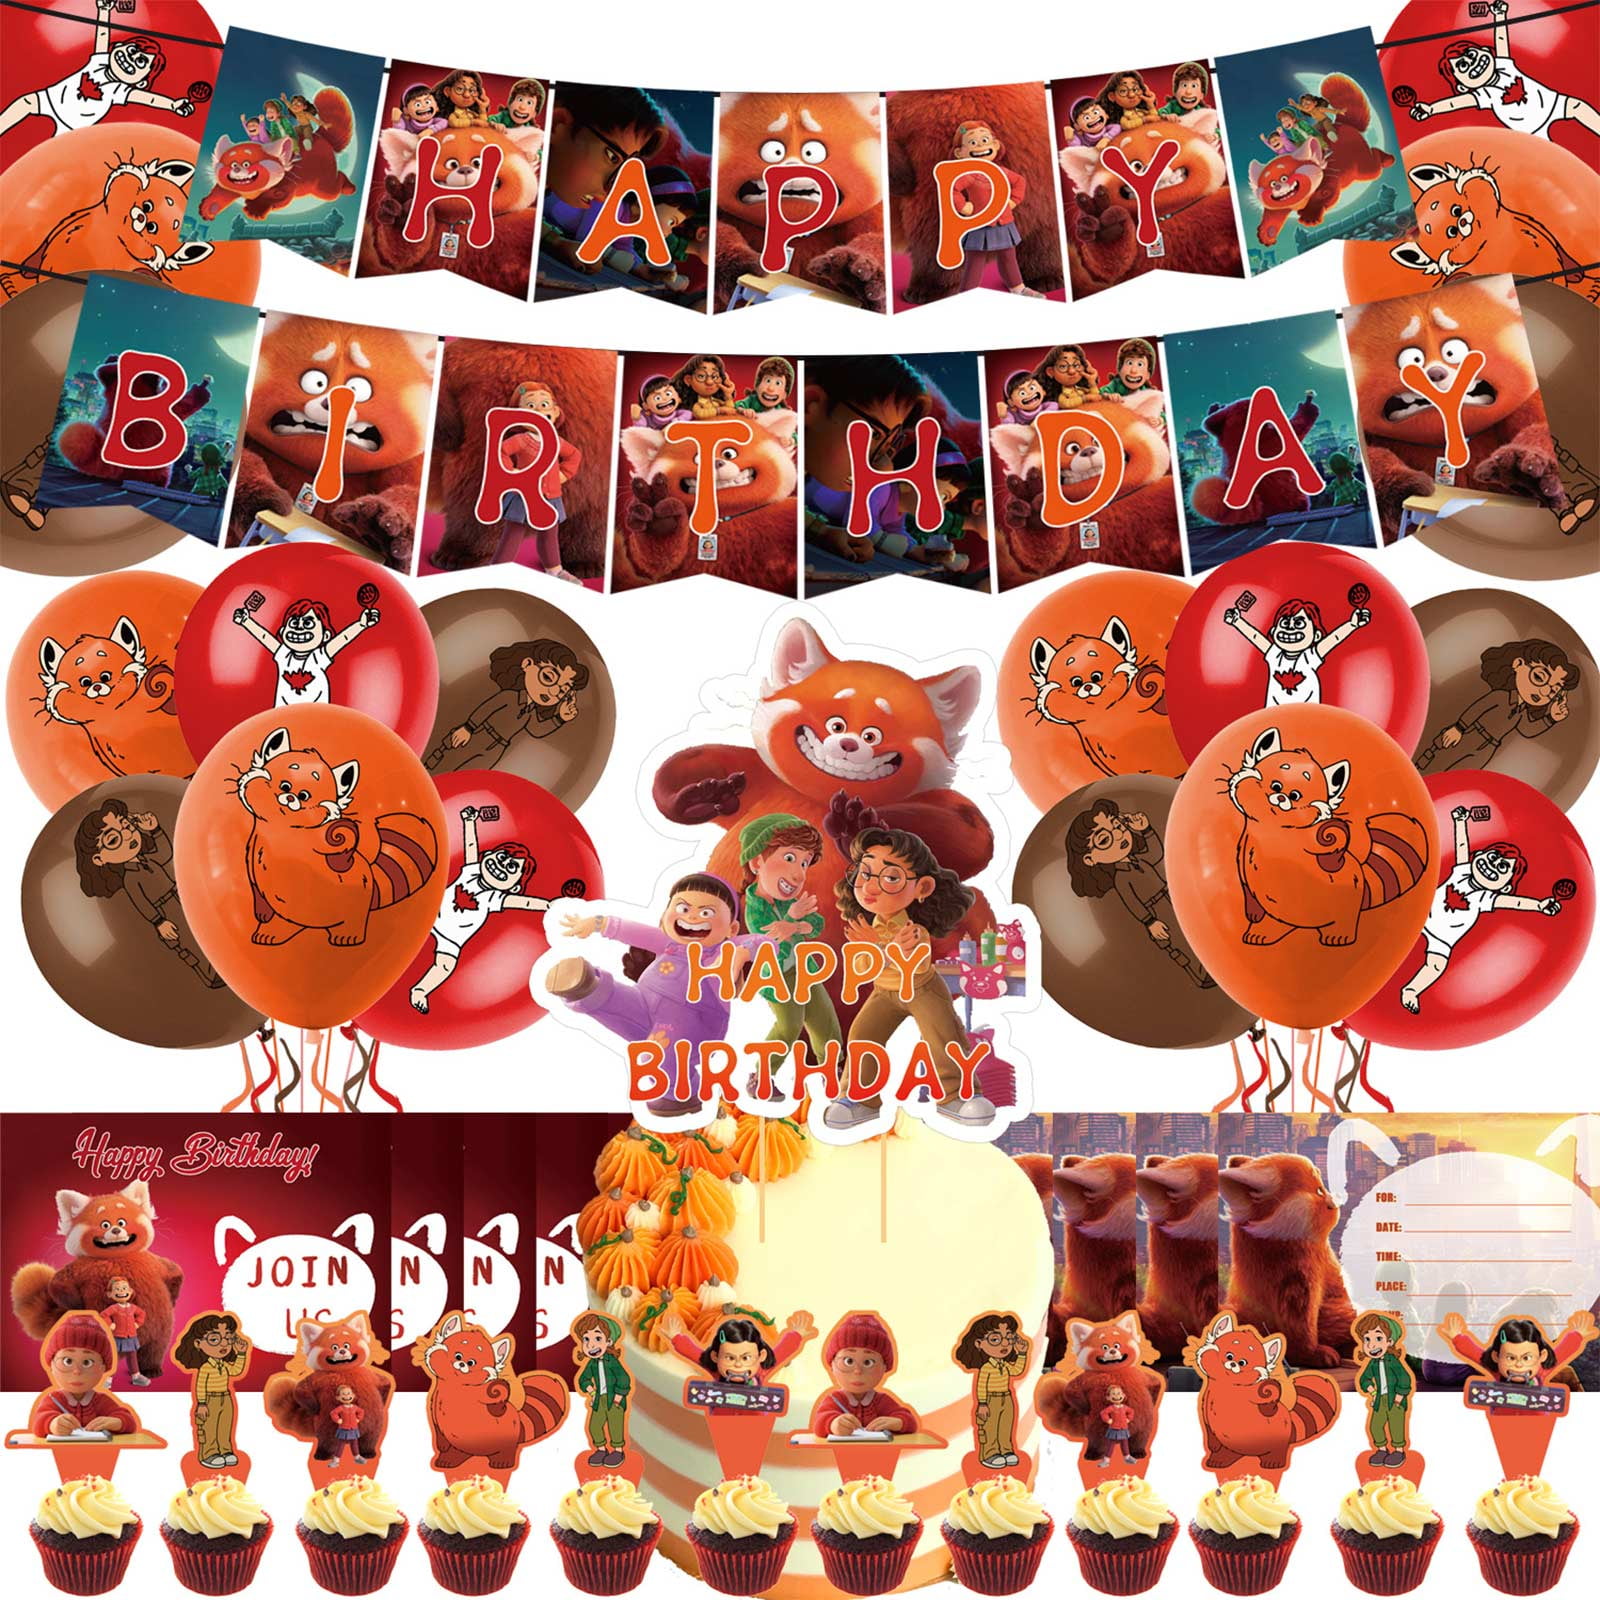 Kids Birthday Party Cupcakes Stand Supplies Cartoon Characters Party Decorations 